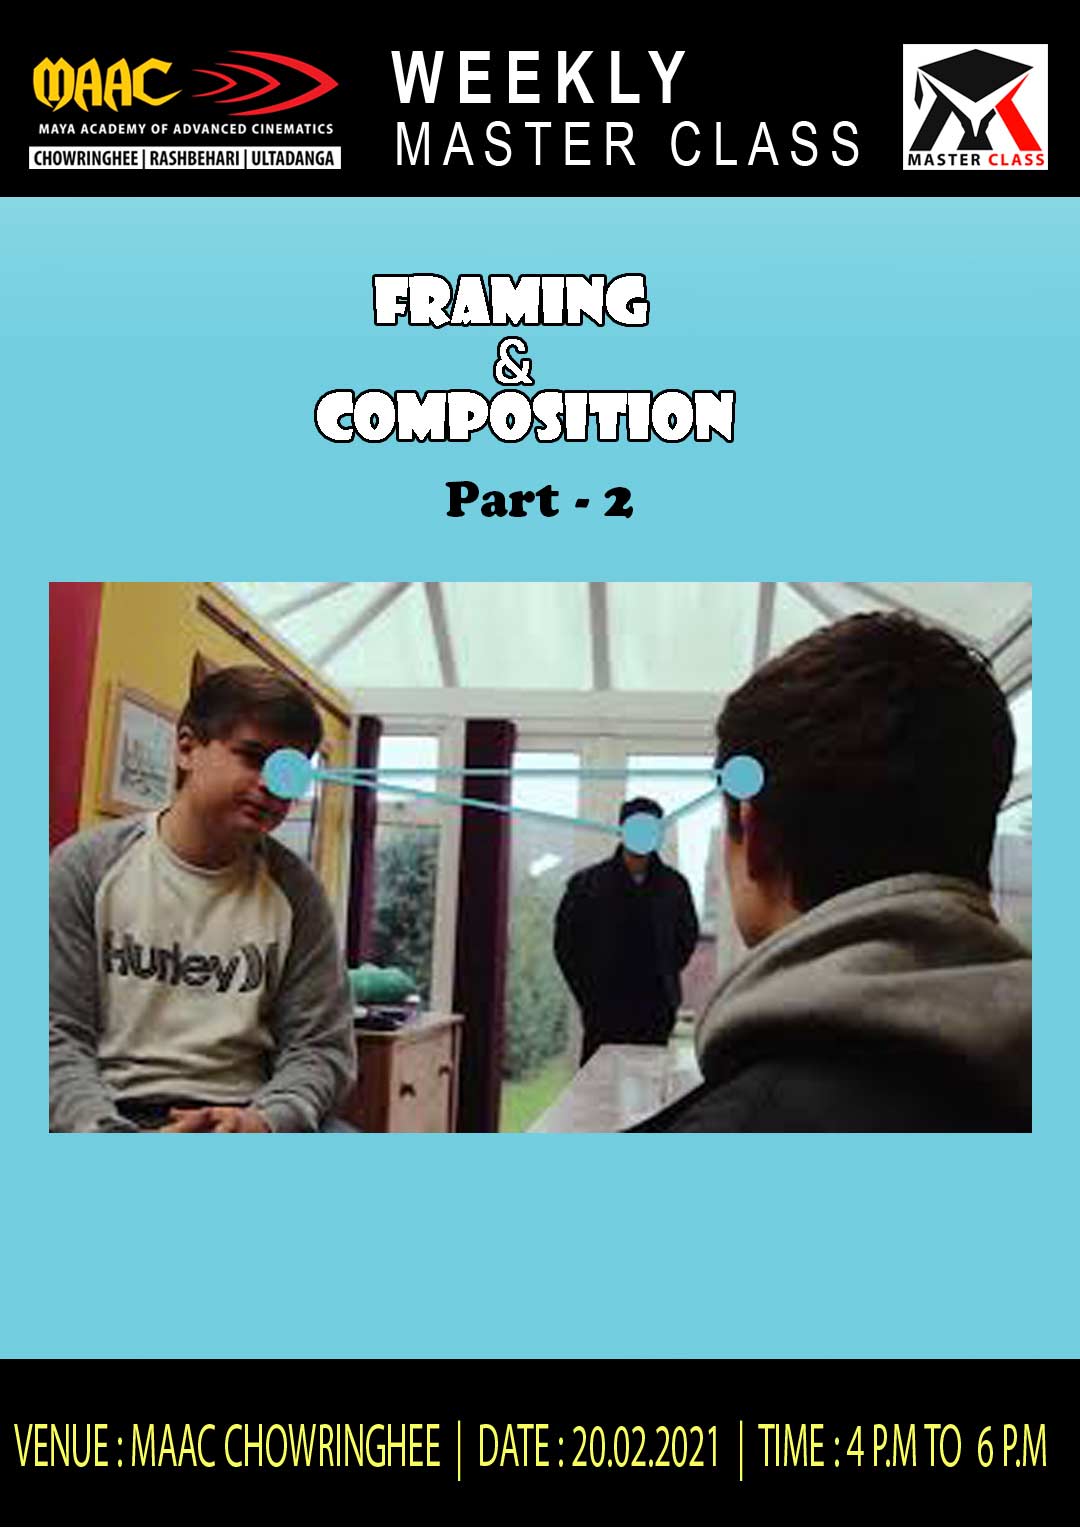 Weekly Master Class on Framing & Compositing Phase 2